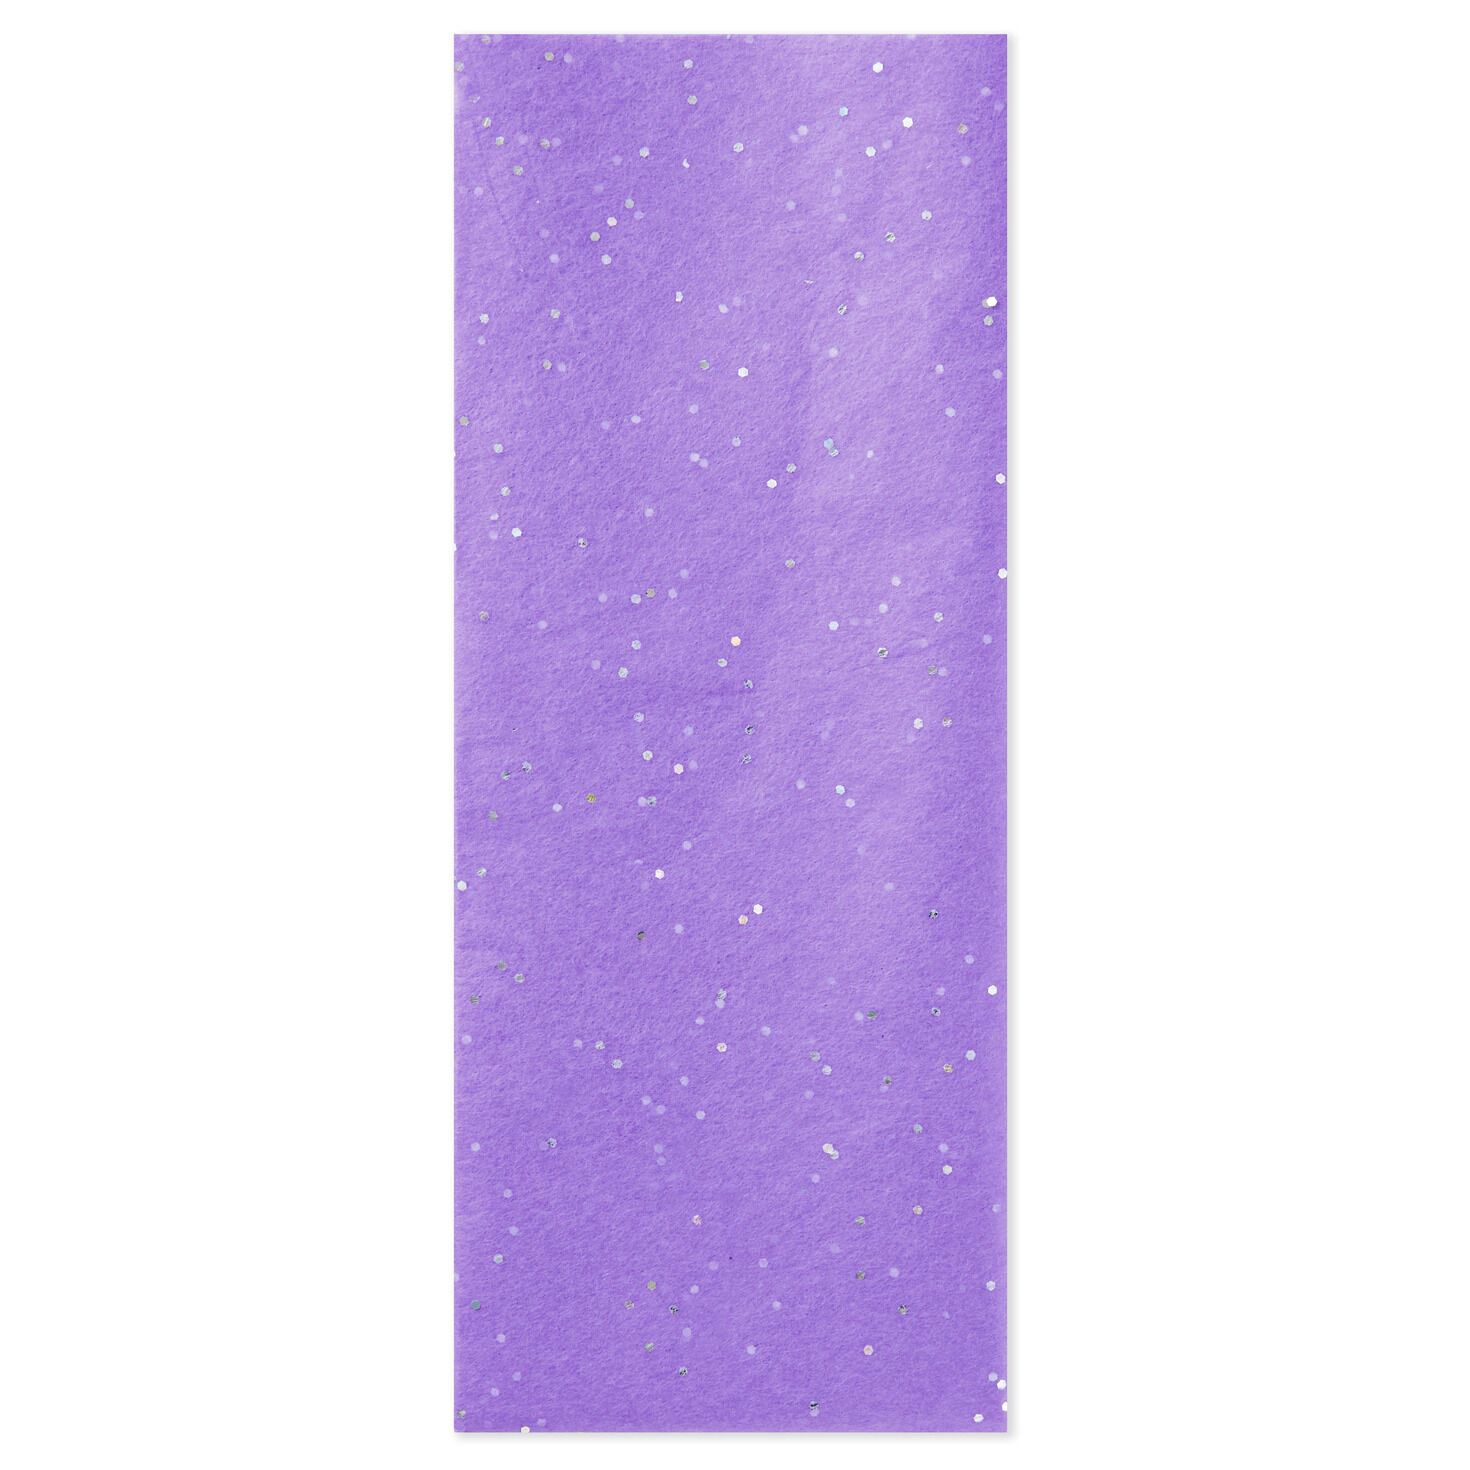 Amethyst Purple With Gems Tissue Paper, 6 sheets for only USD 2.49 | Hallmark